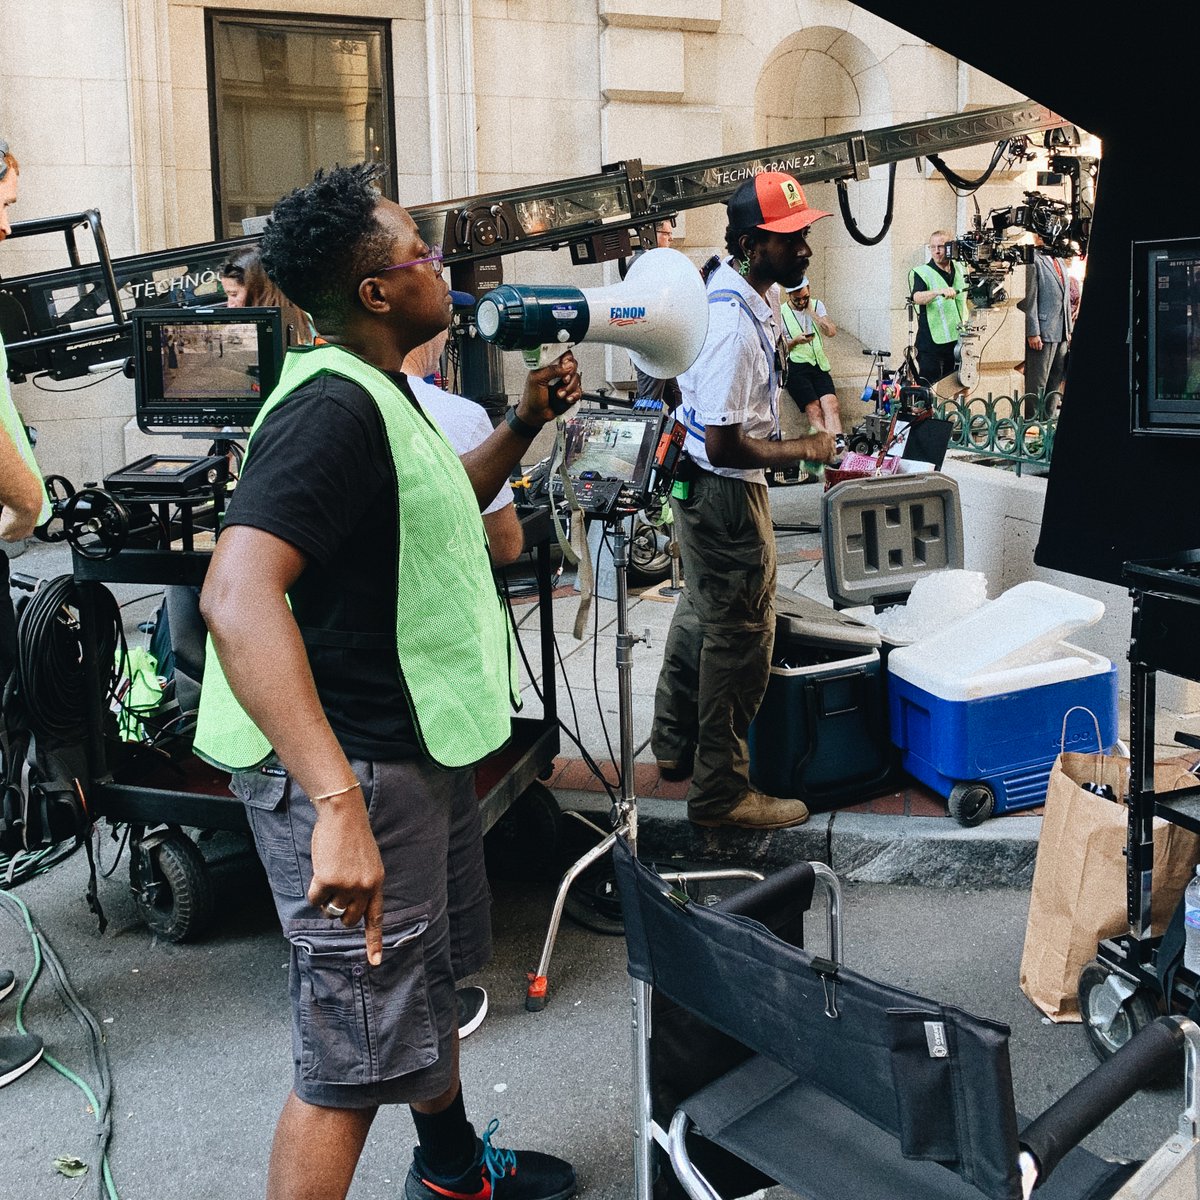 In action 🎬

Behind-the-scenes of episode 5 of @LovecraftHBO. Thank you so much for having me and for letting me help tell the story.

#LovecraftCountry #LovecraftHBO #FemaleFilmmaker #BlackFilmmakers #BlackWomenDirectors #Director #Filmmaker #TV